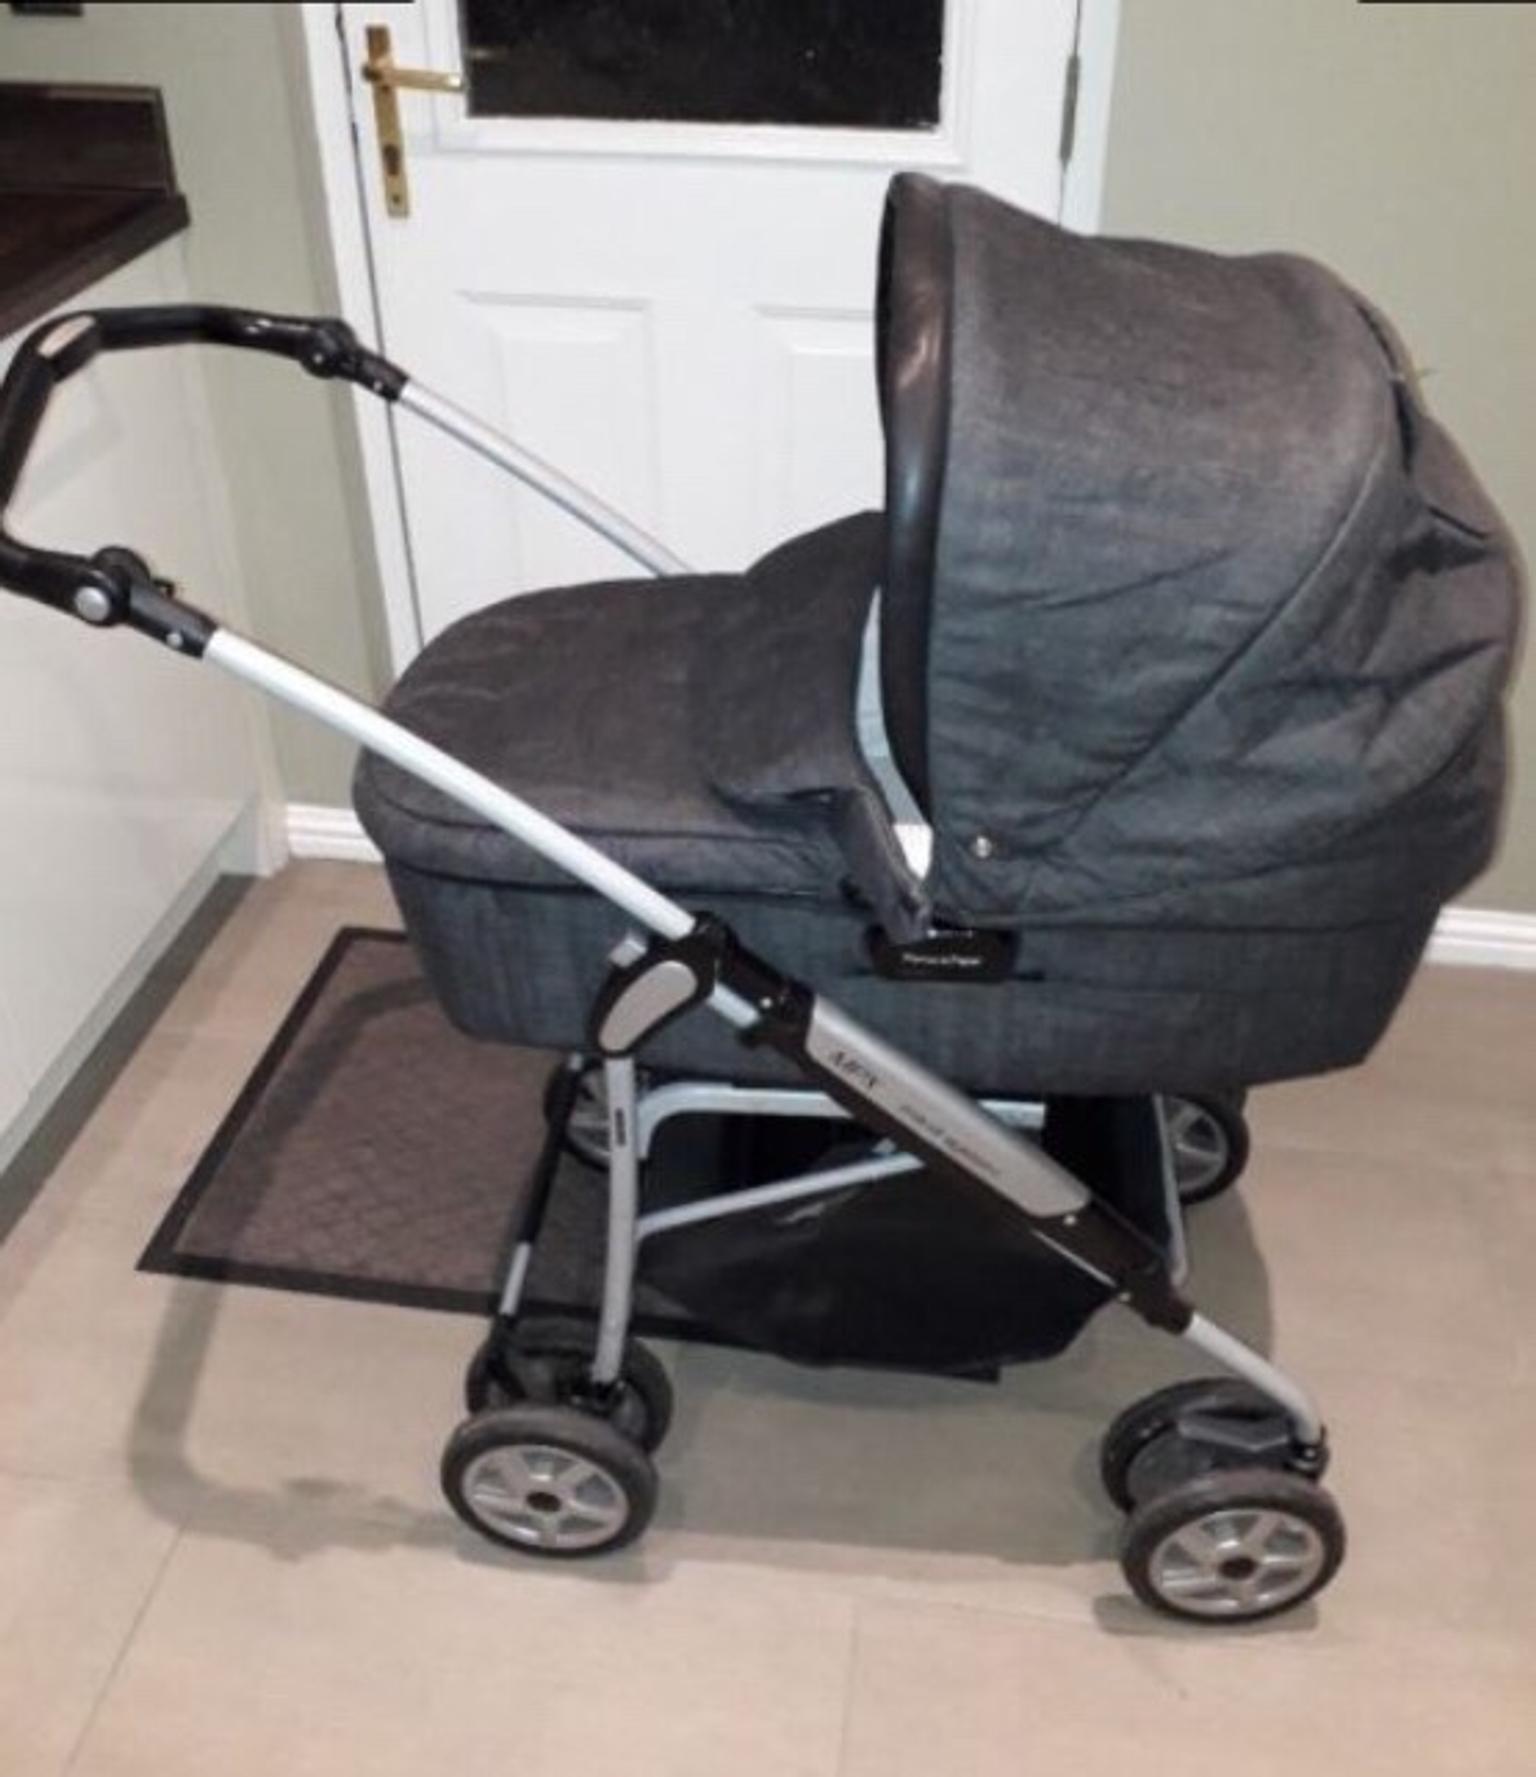 mamas and papas mpx travel system instructions